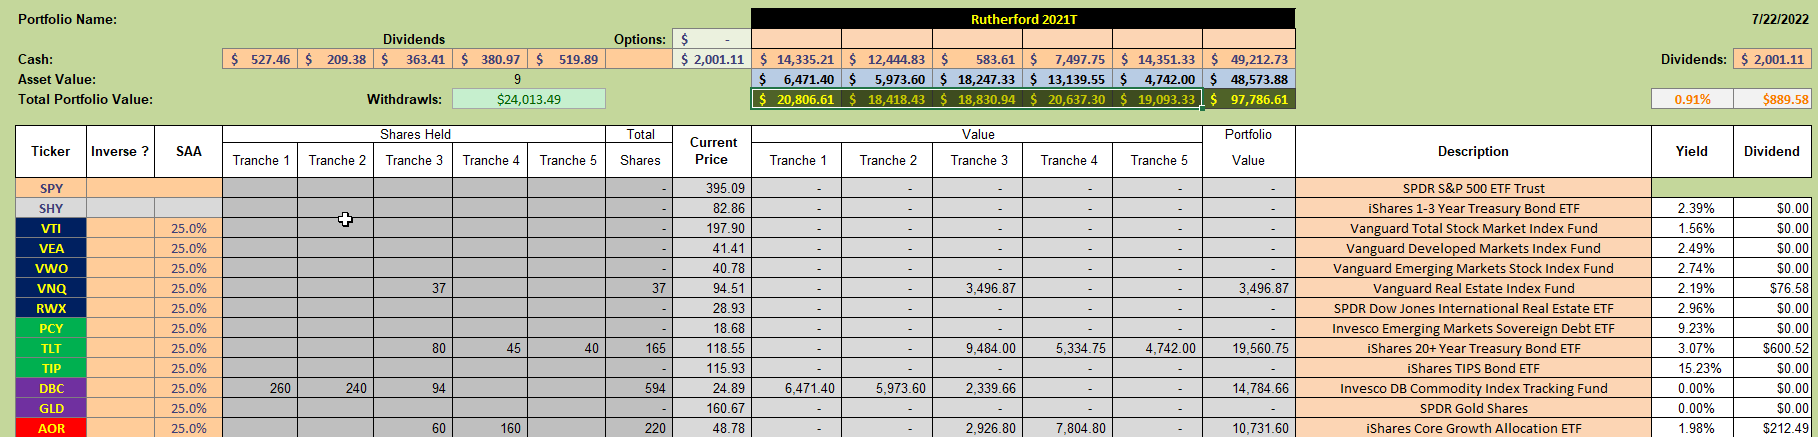 Rutherford Portfolio Review (Tranche 1): 22 July 2022 5